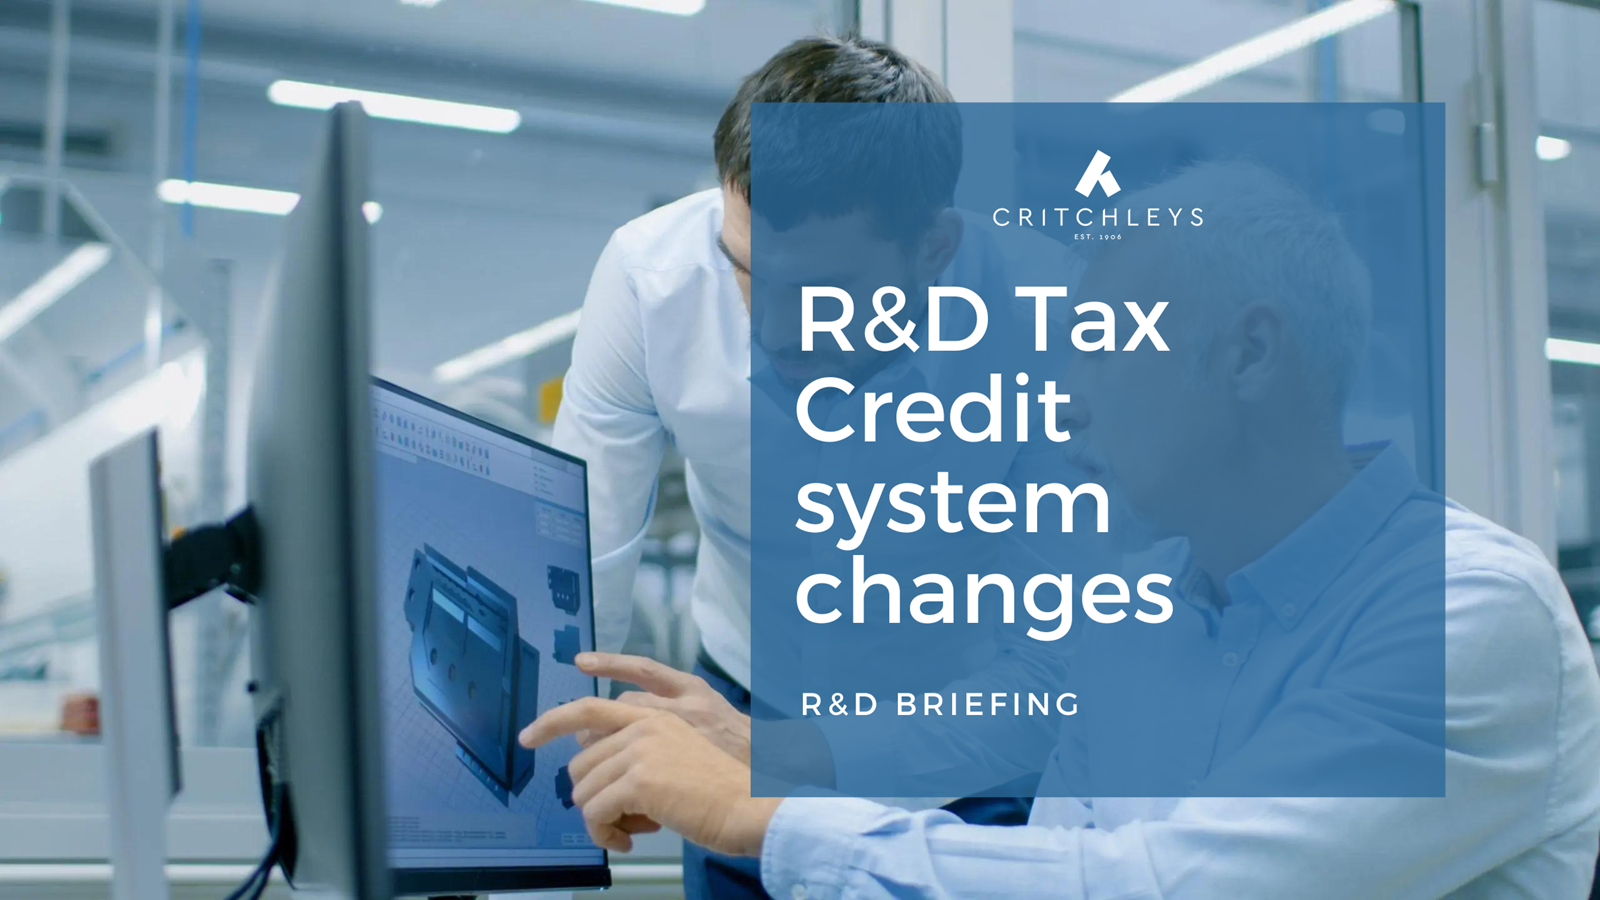 Changes to the R & D Tax Credit System